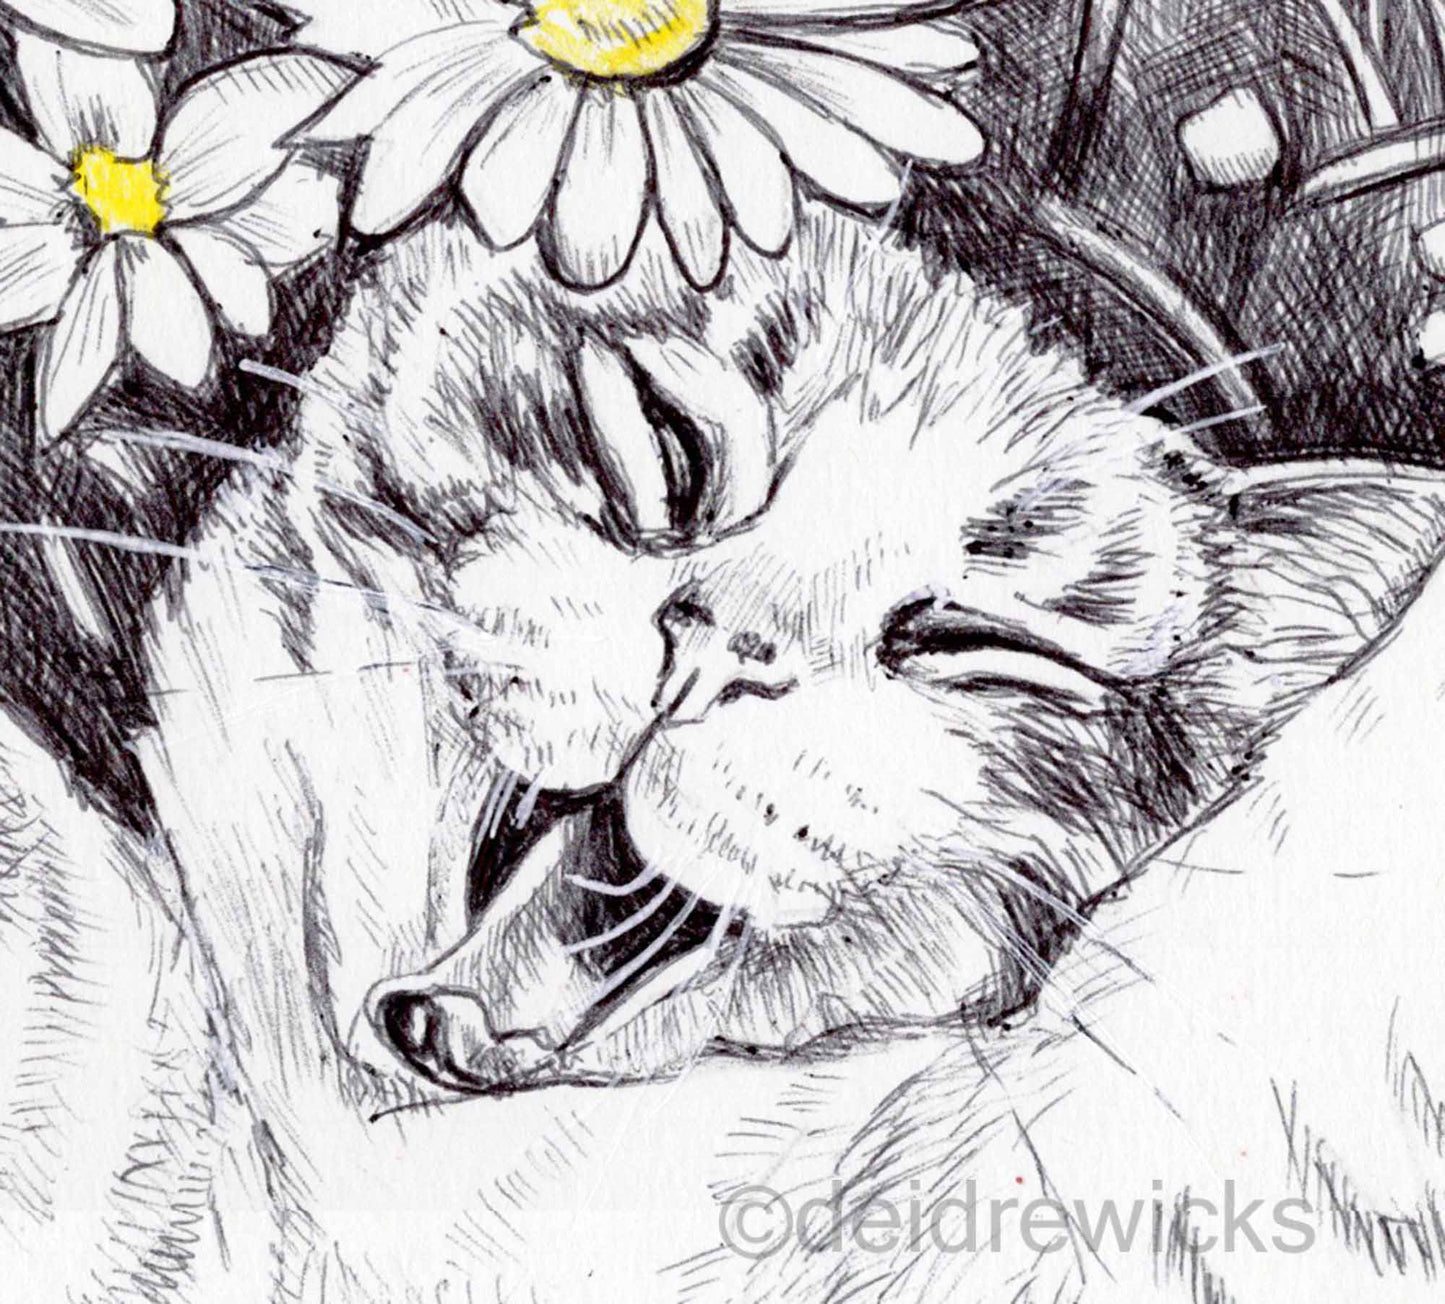 Close up of a ballpoint pen drawing of a cat face by Deidre Wicks